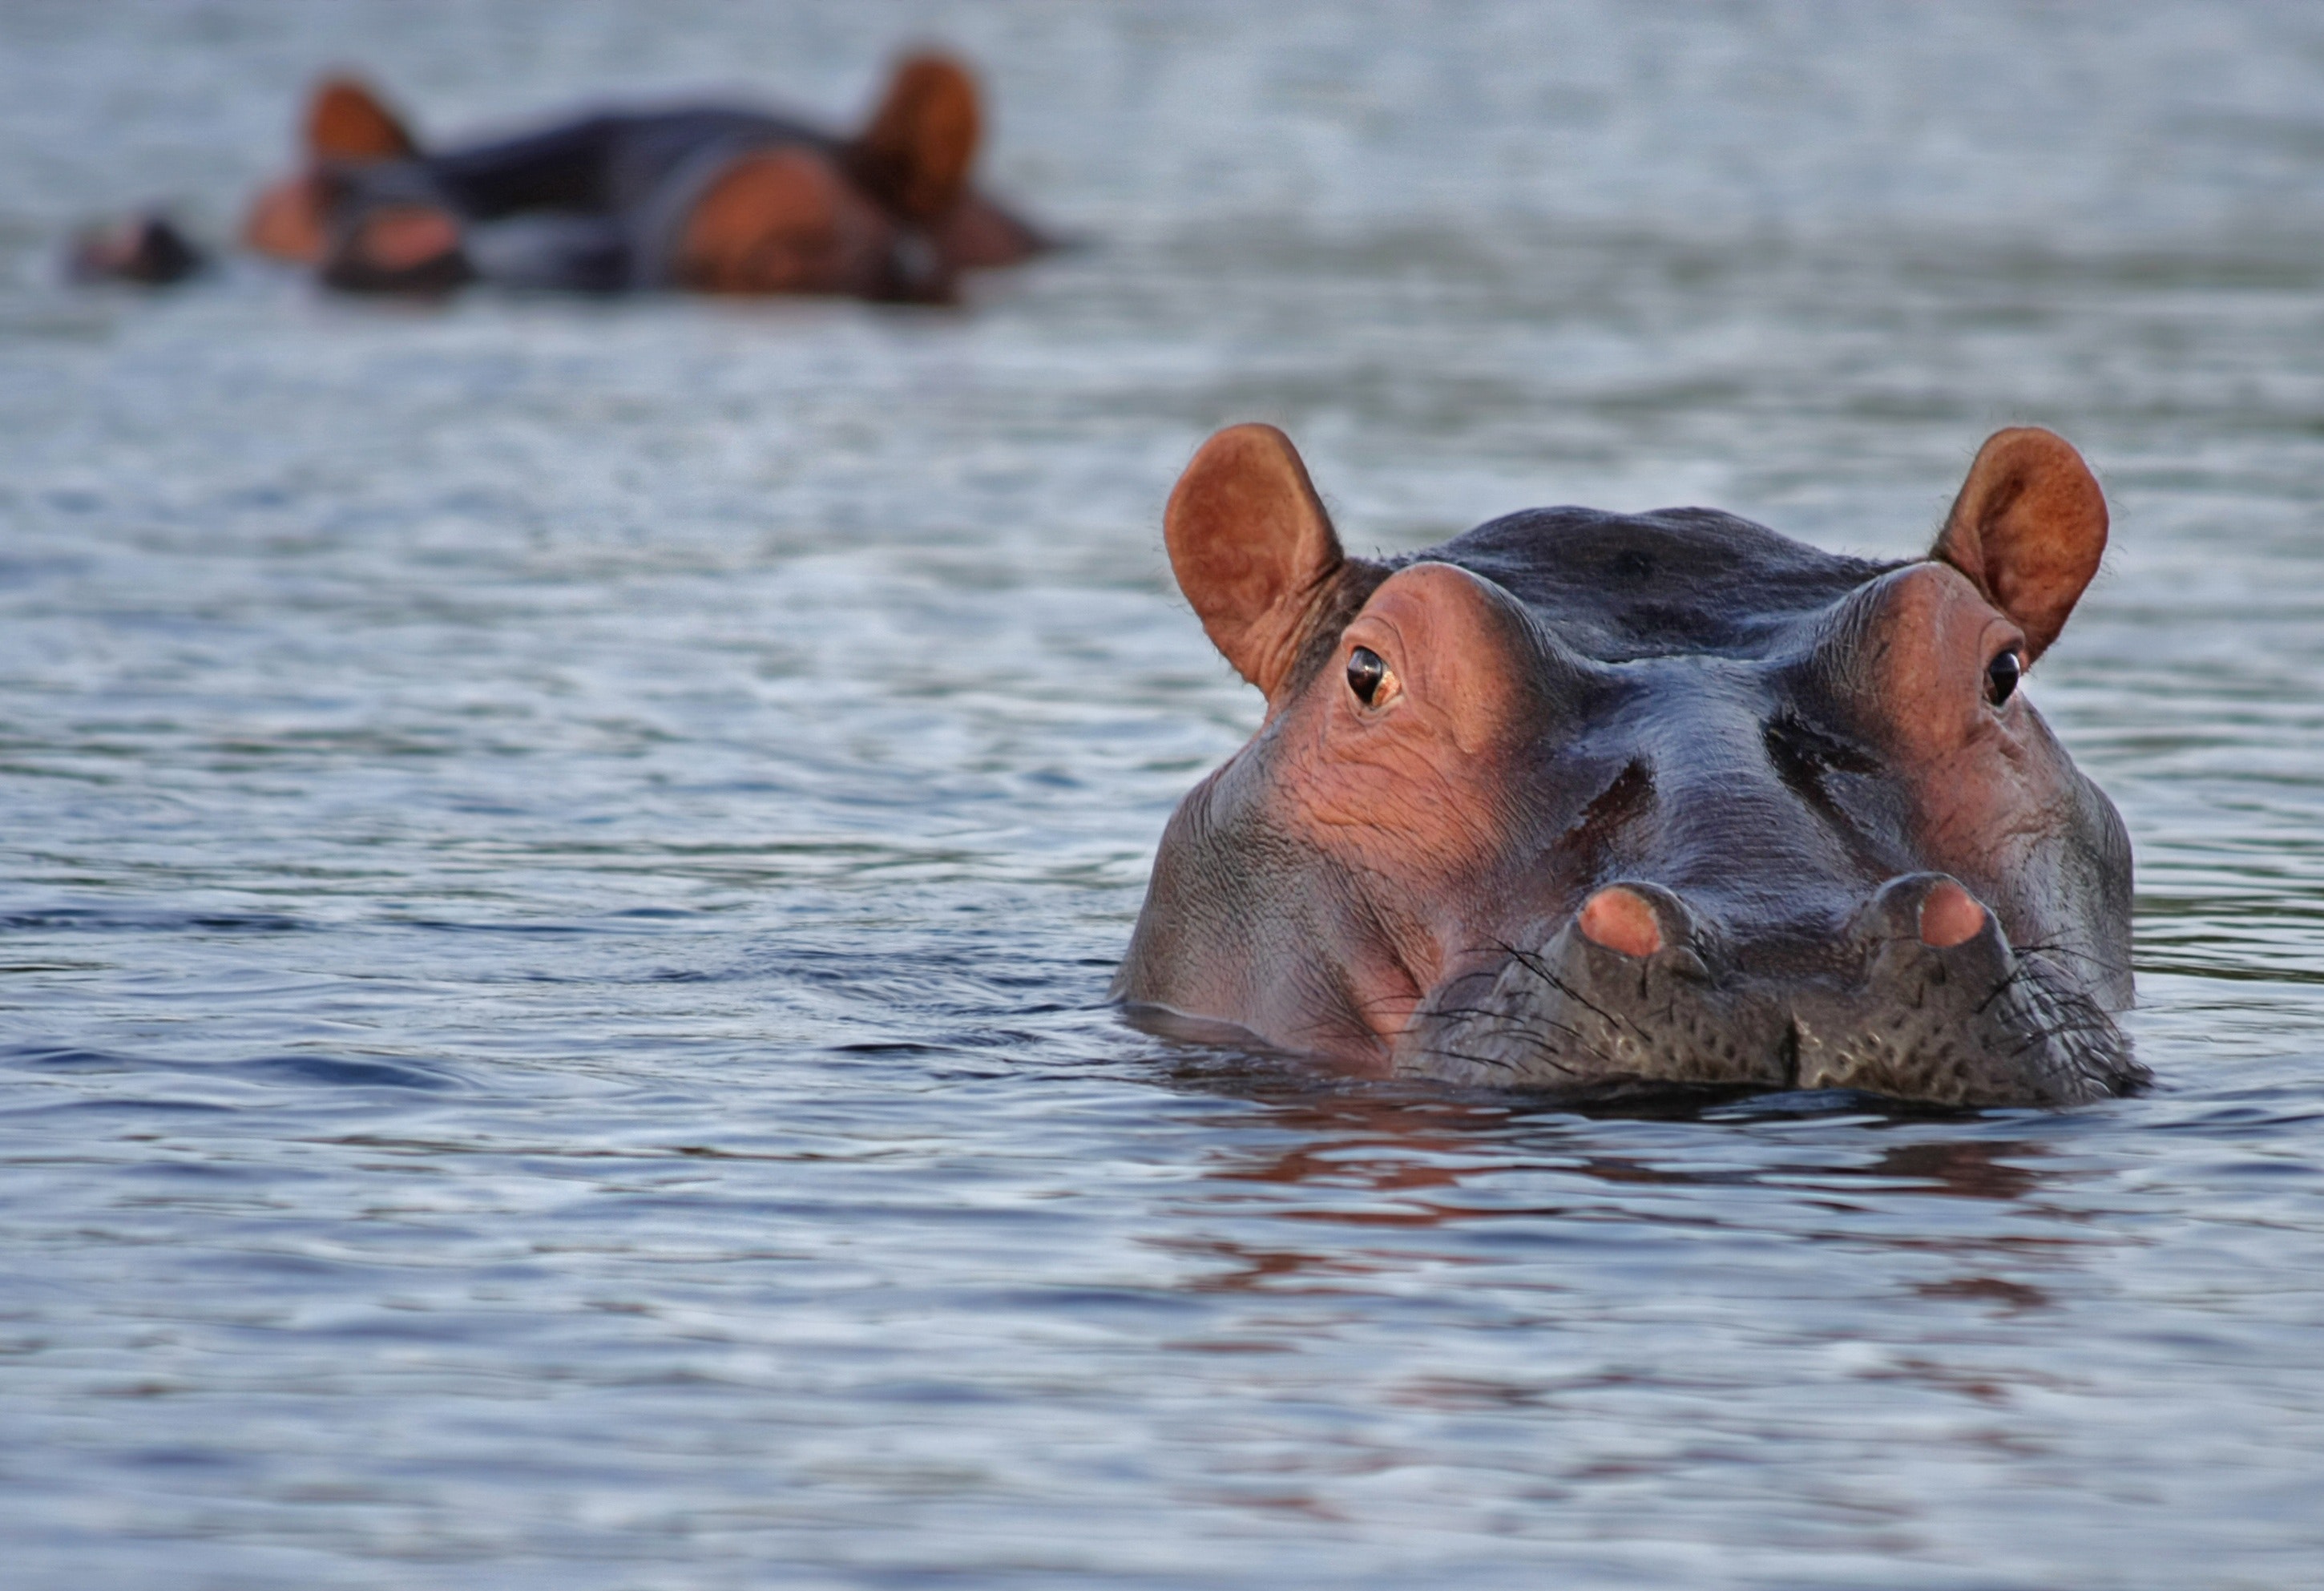 Hippos in water photo